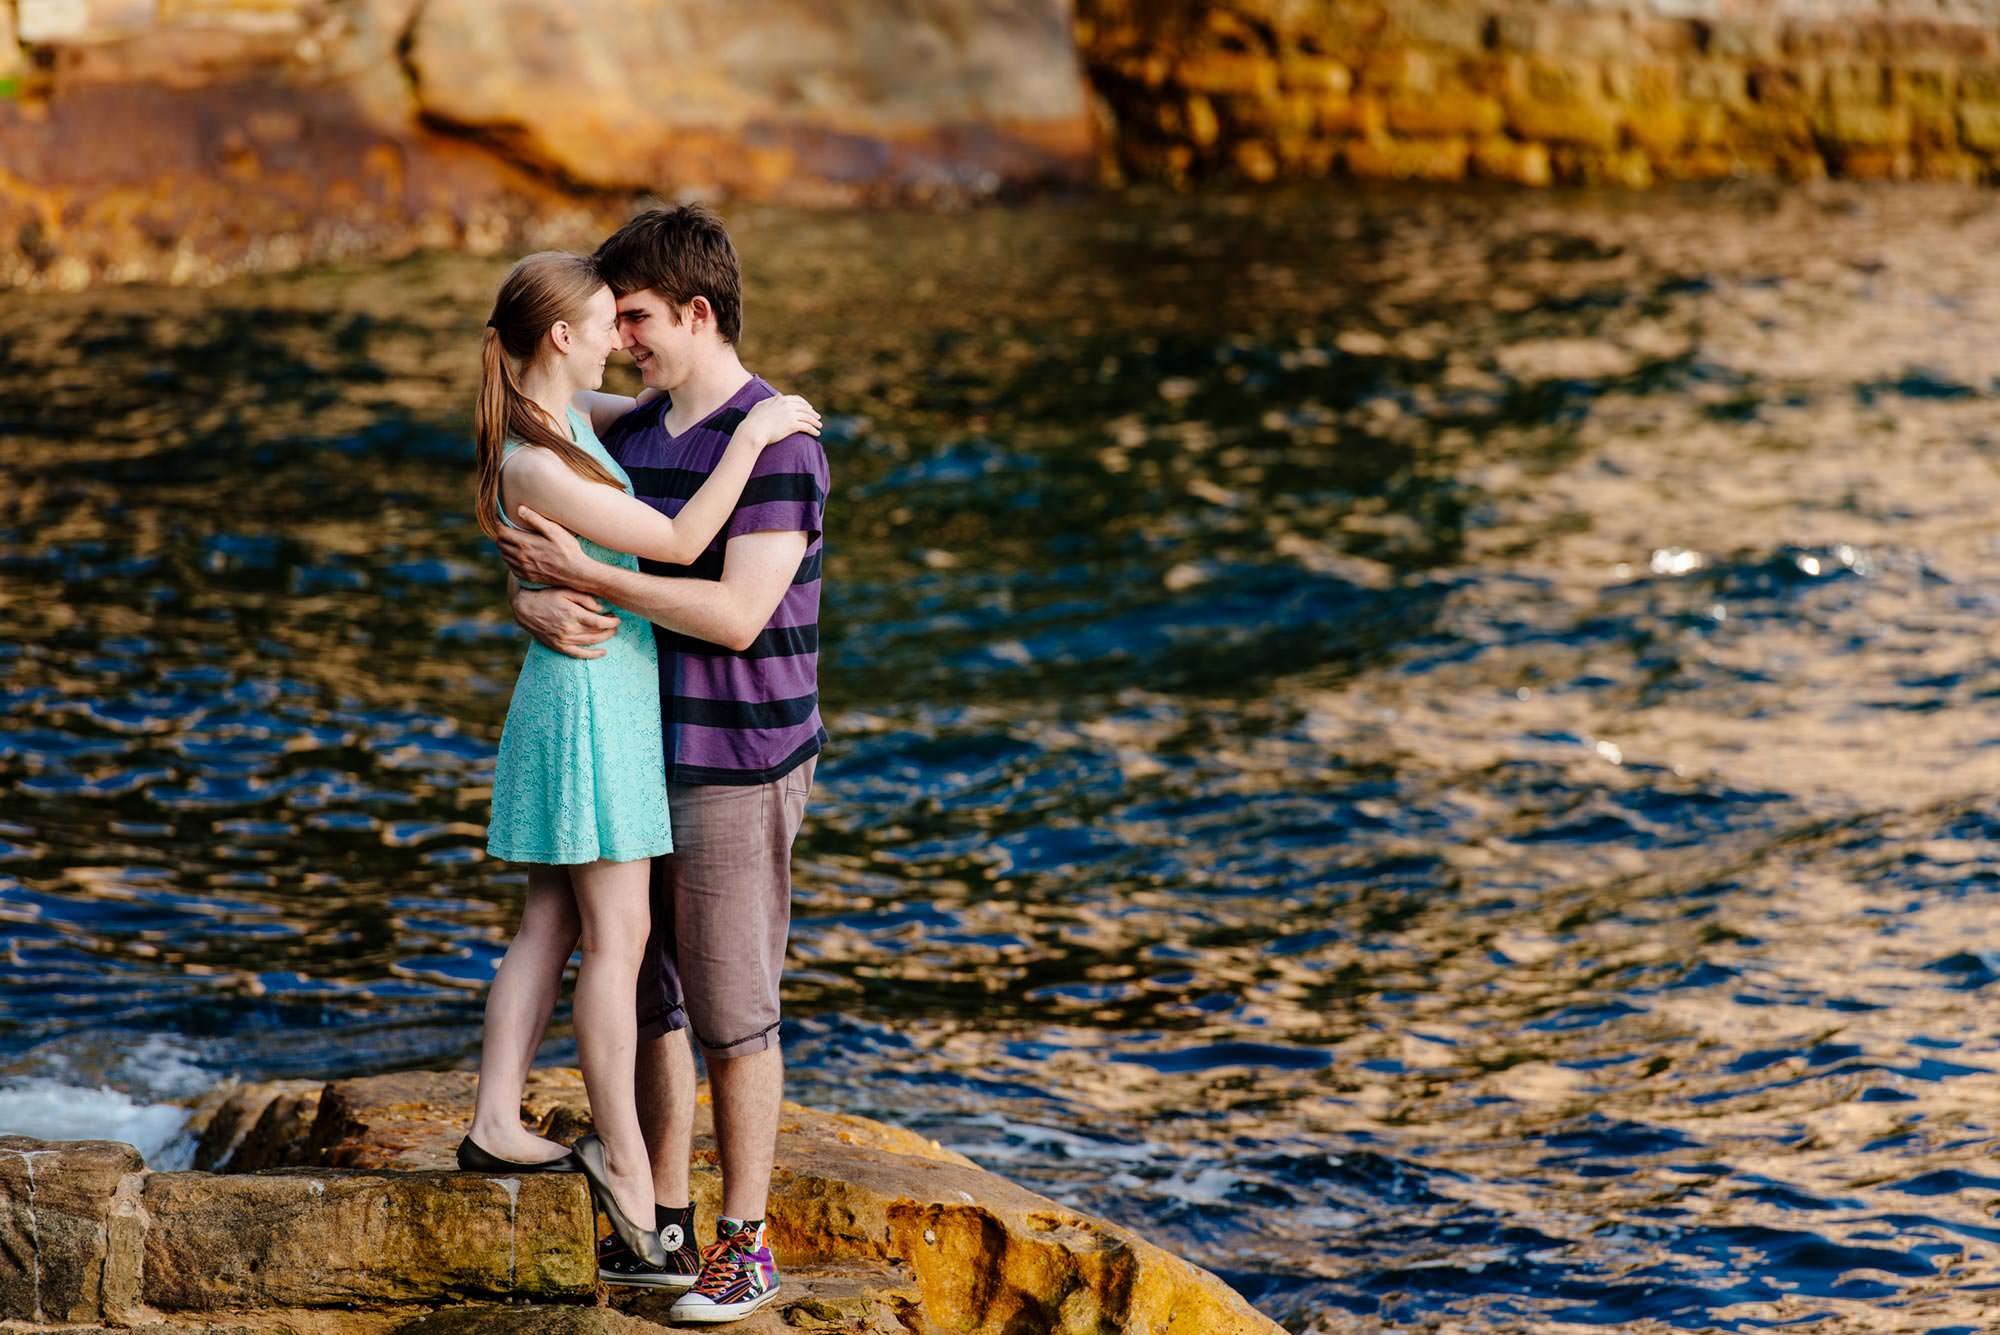 Peter and Jodie's Sydney pre-wedding photoshoot